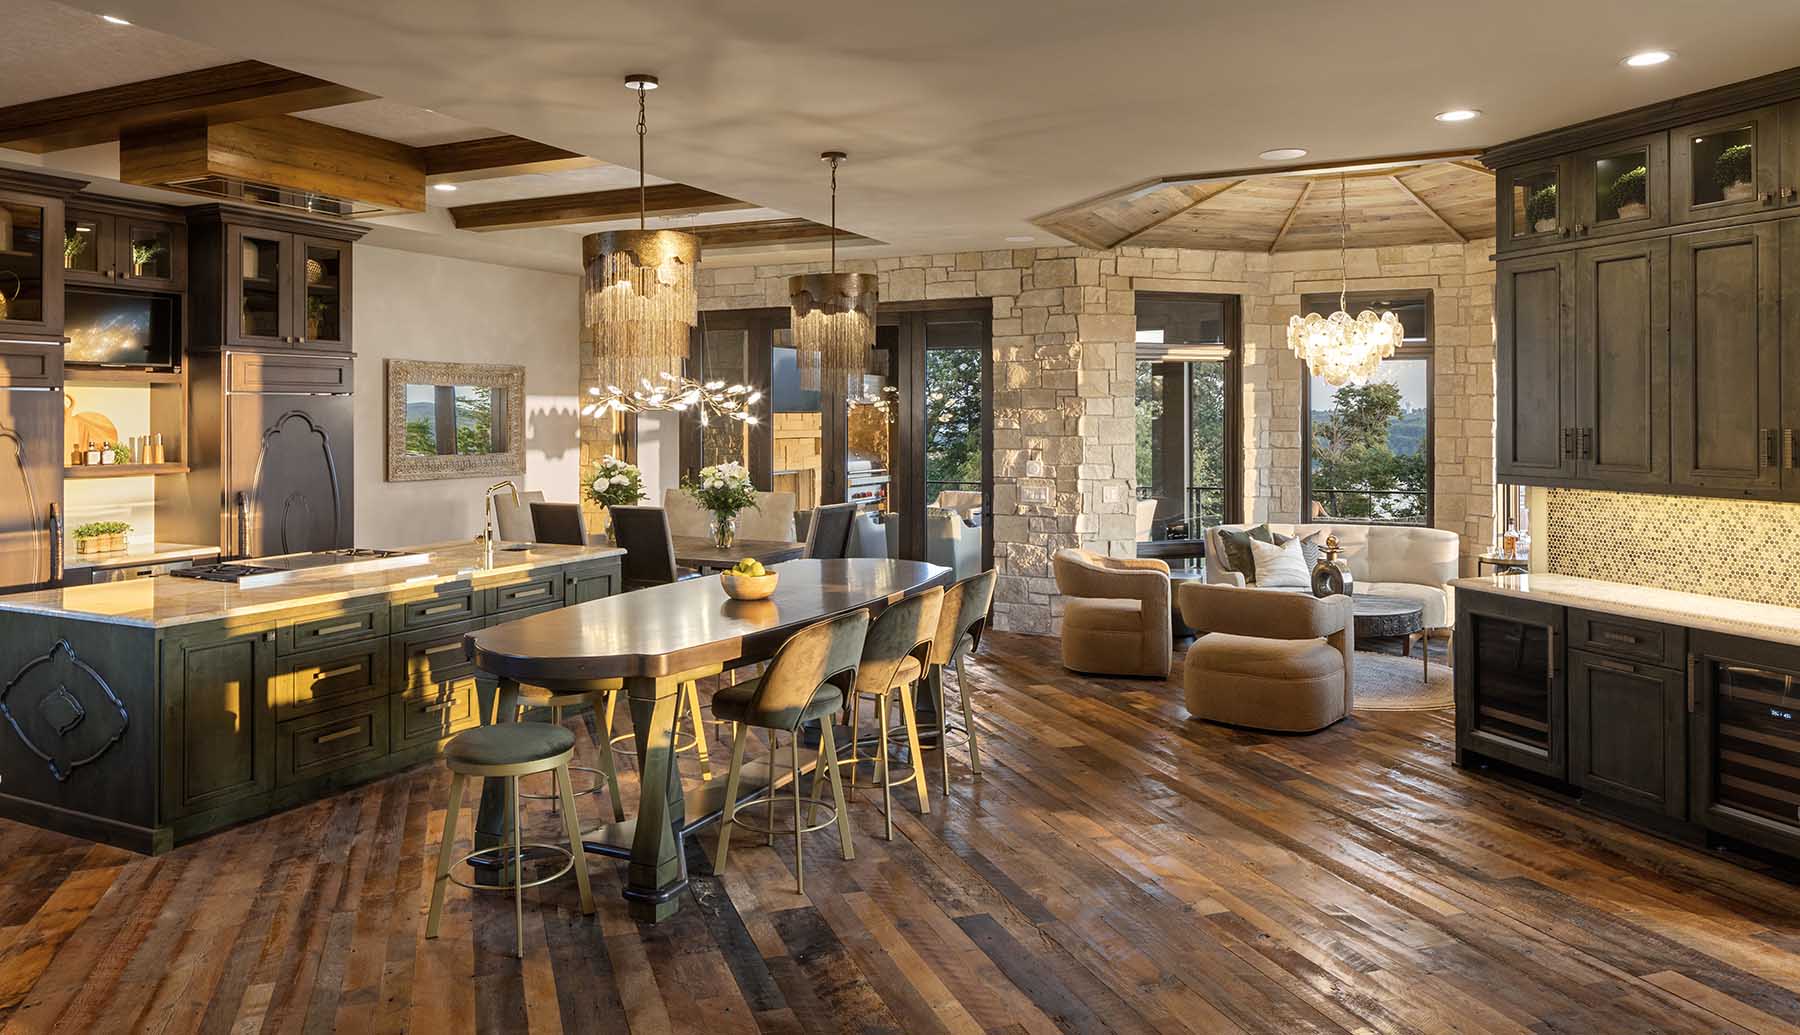 A large kitchen with wood floors and a bar area in a Modern Tuscan Mediterranean home.